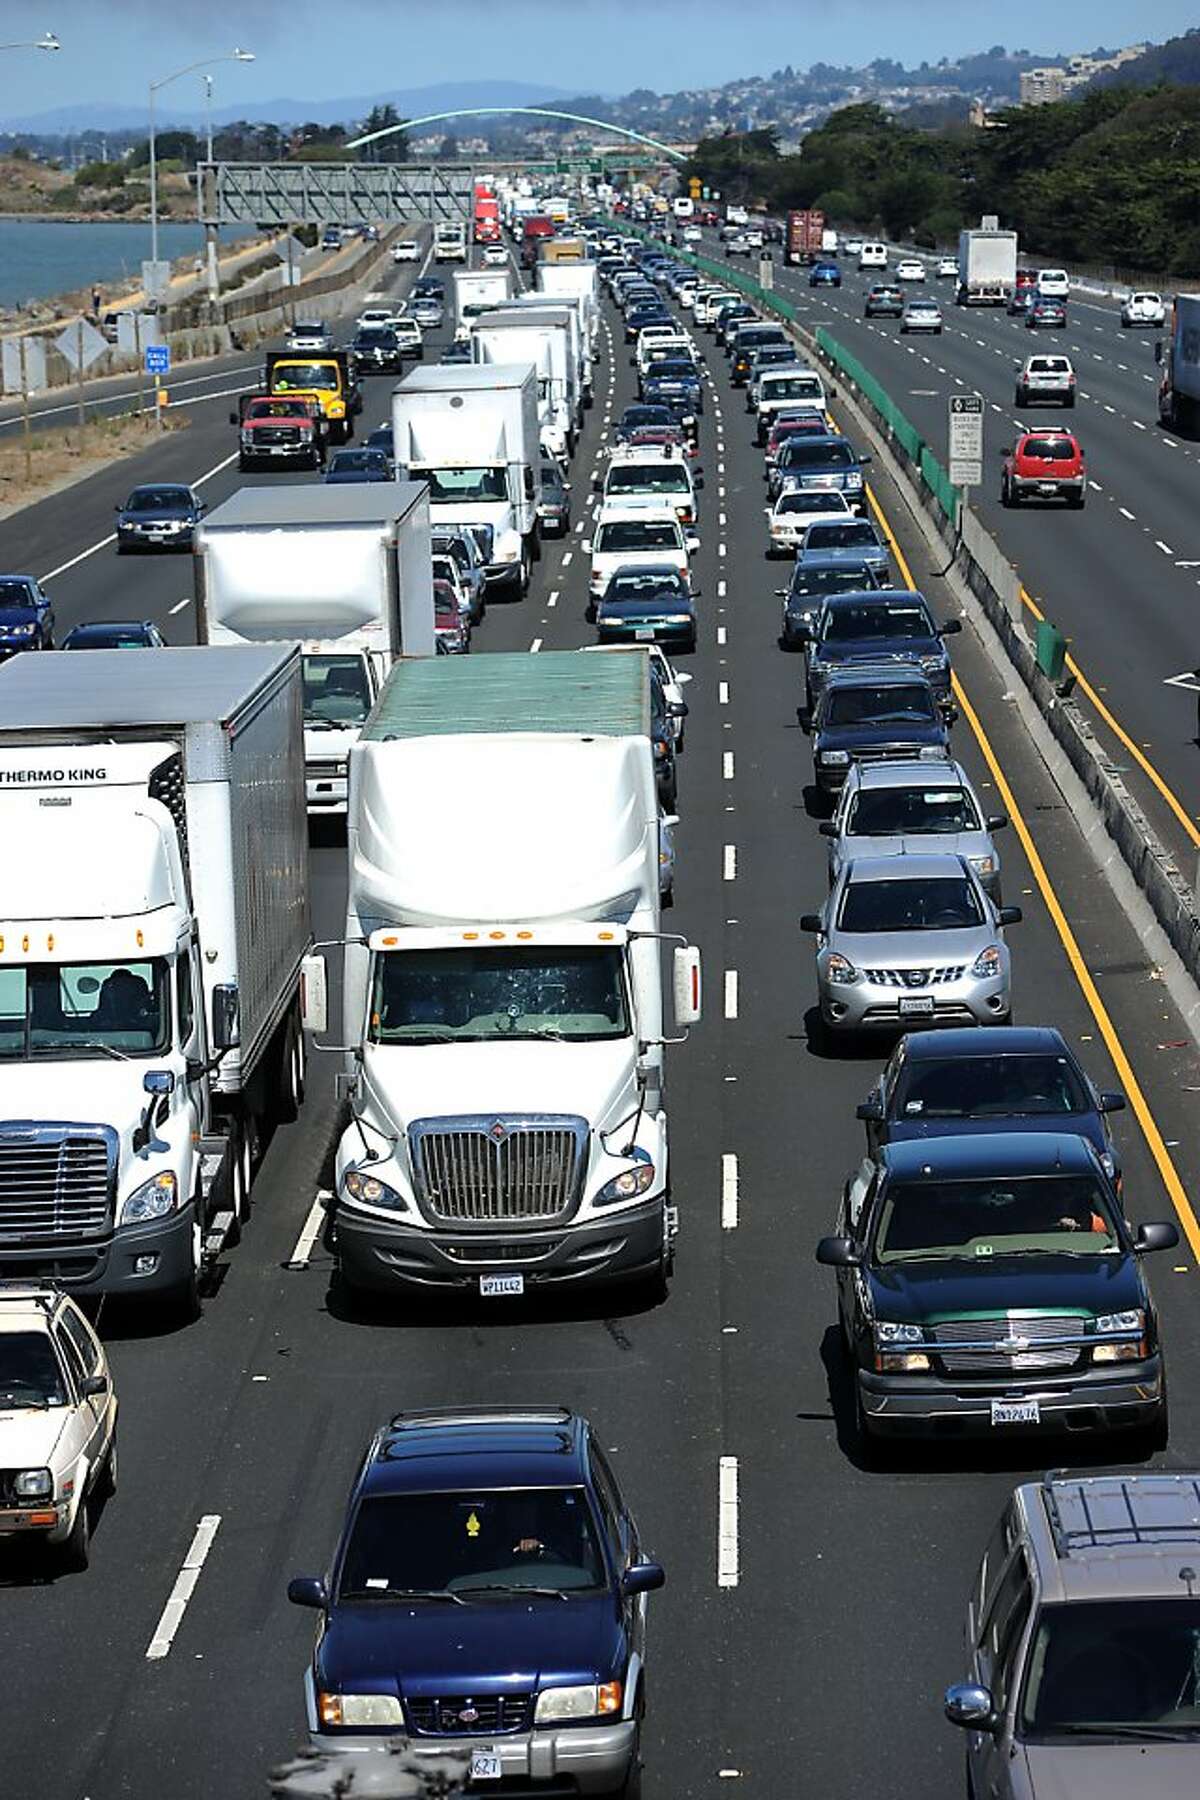 Traffic is seen backed up along south bound Interstate 80 due to the Bay Bridge closure, in Oakland, California, Thursday August 29, 2013.